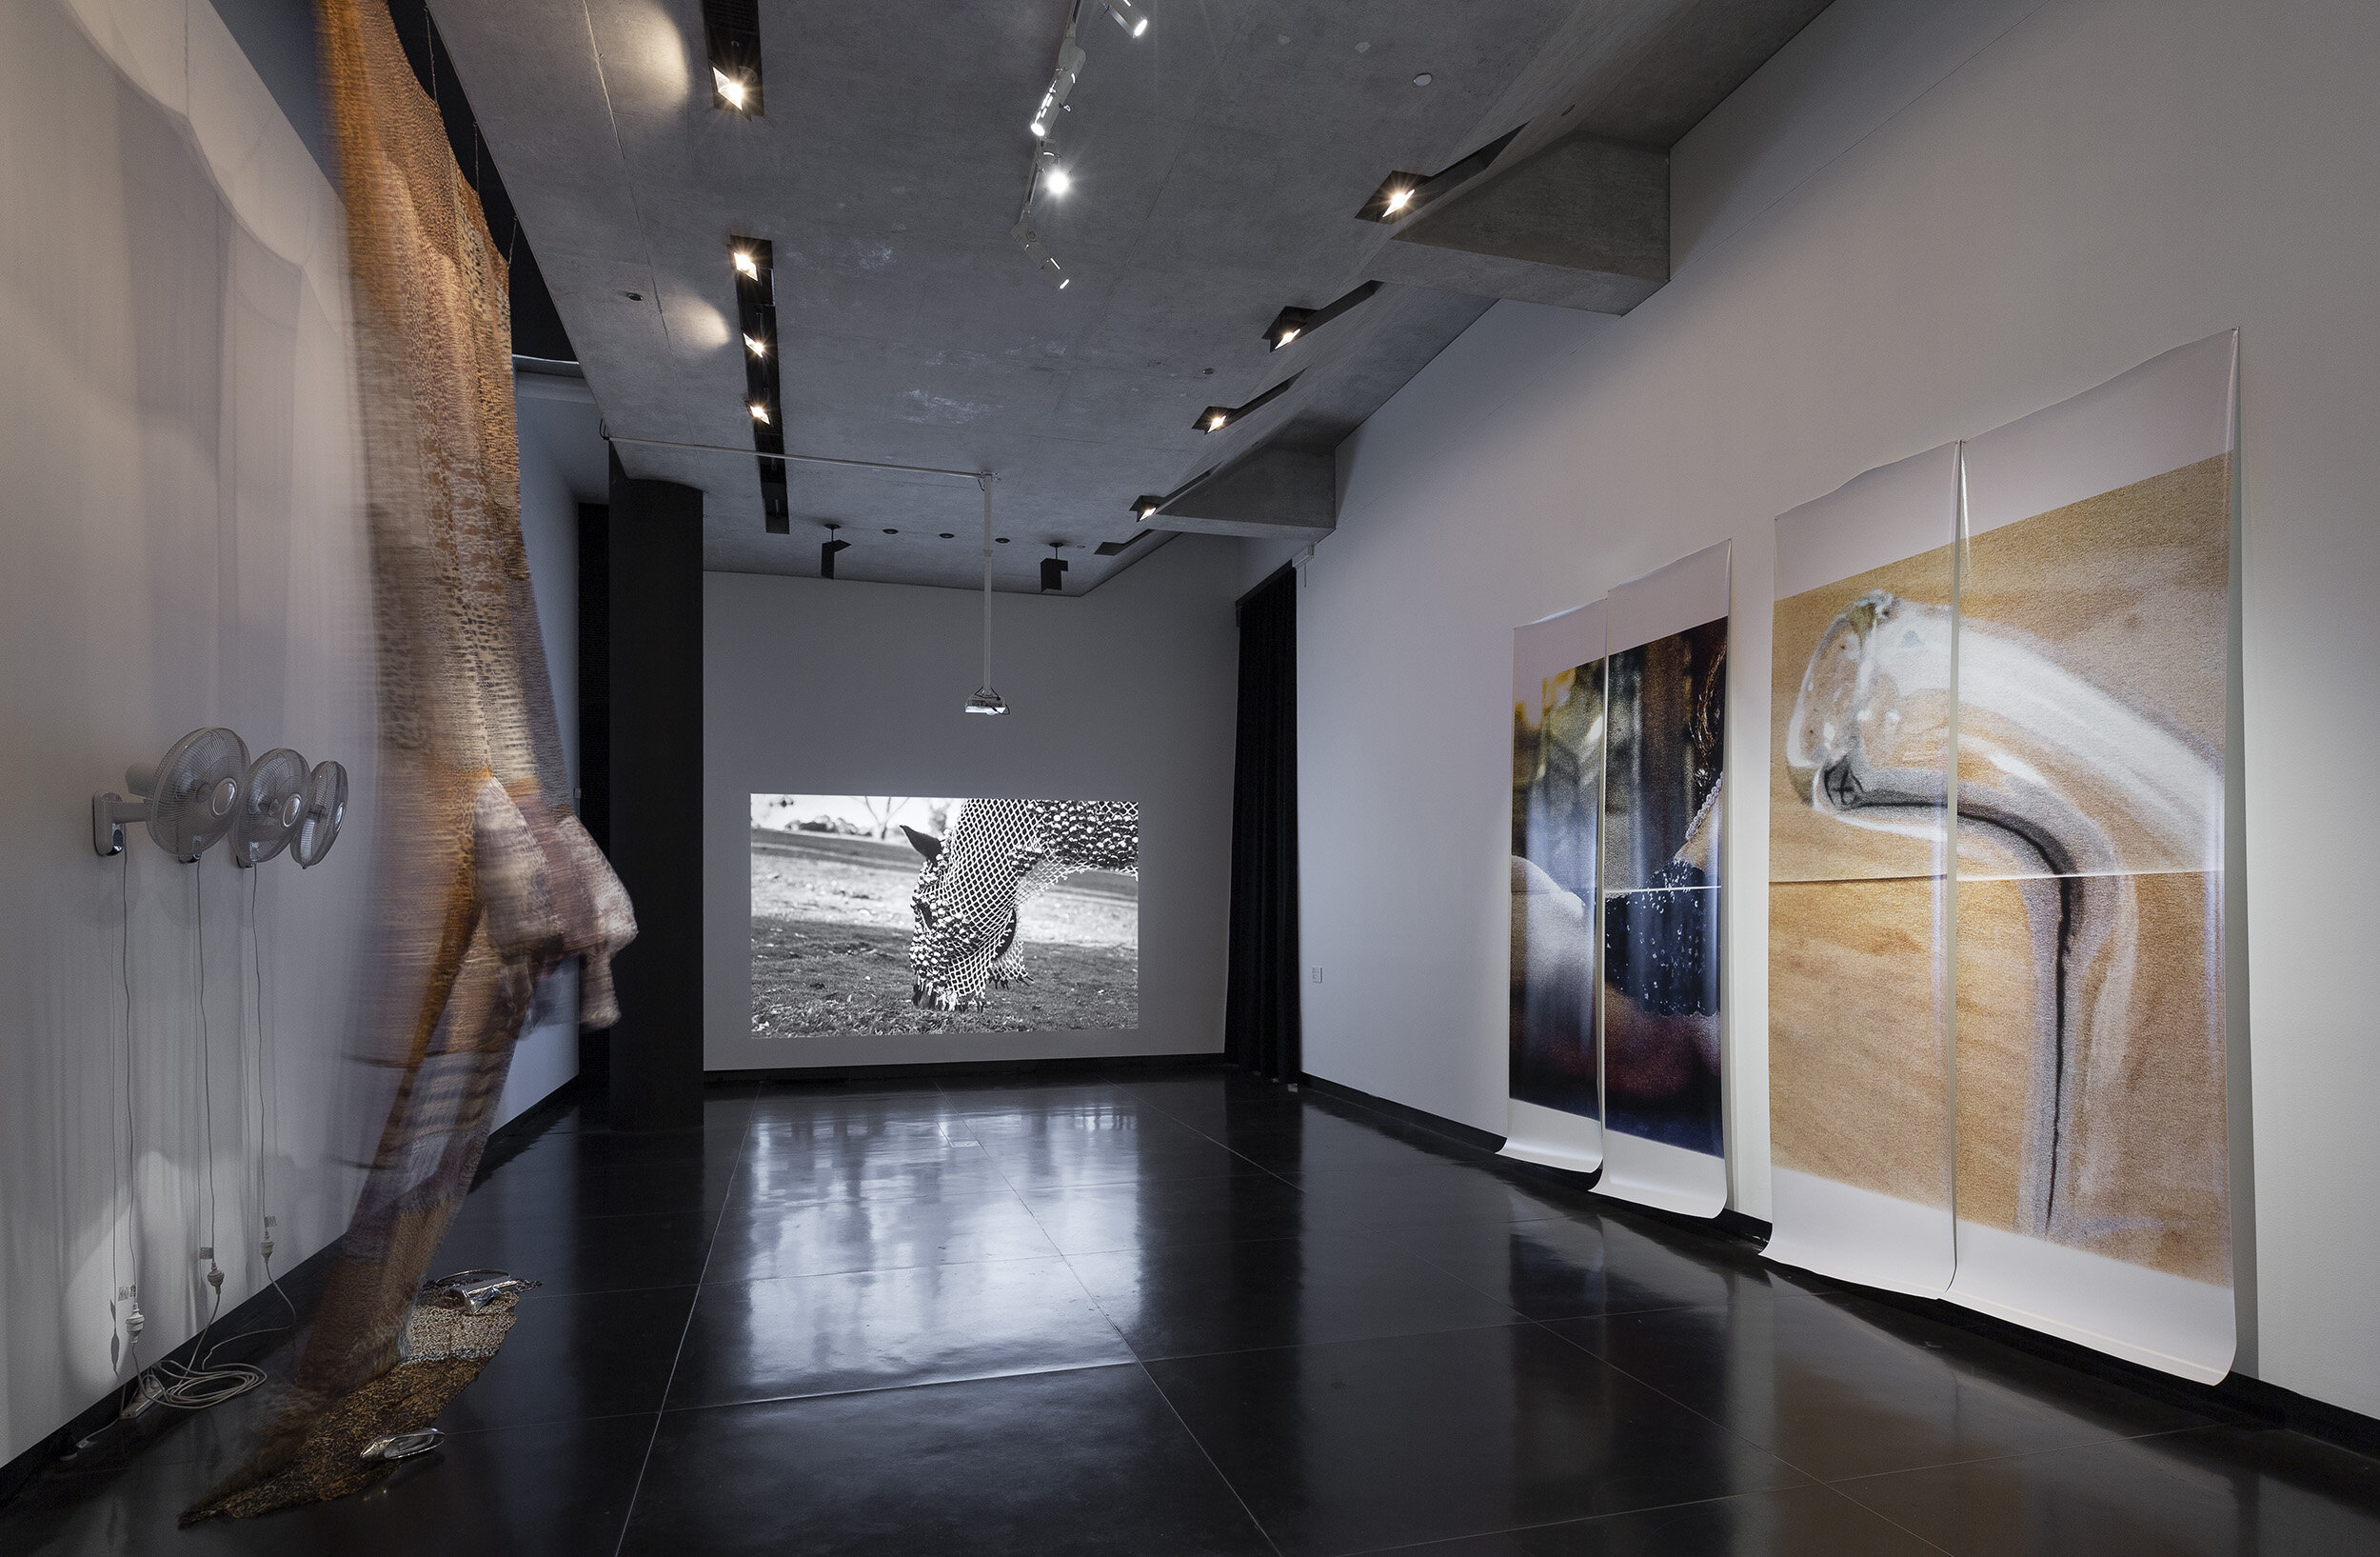 Photograph by Christian Capurro. Installation view, Performing textiles, Ian Potter Museum of Art, University of Melbourne.